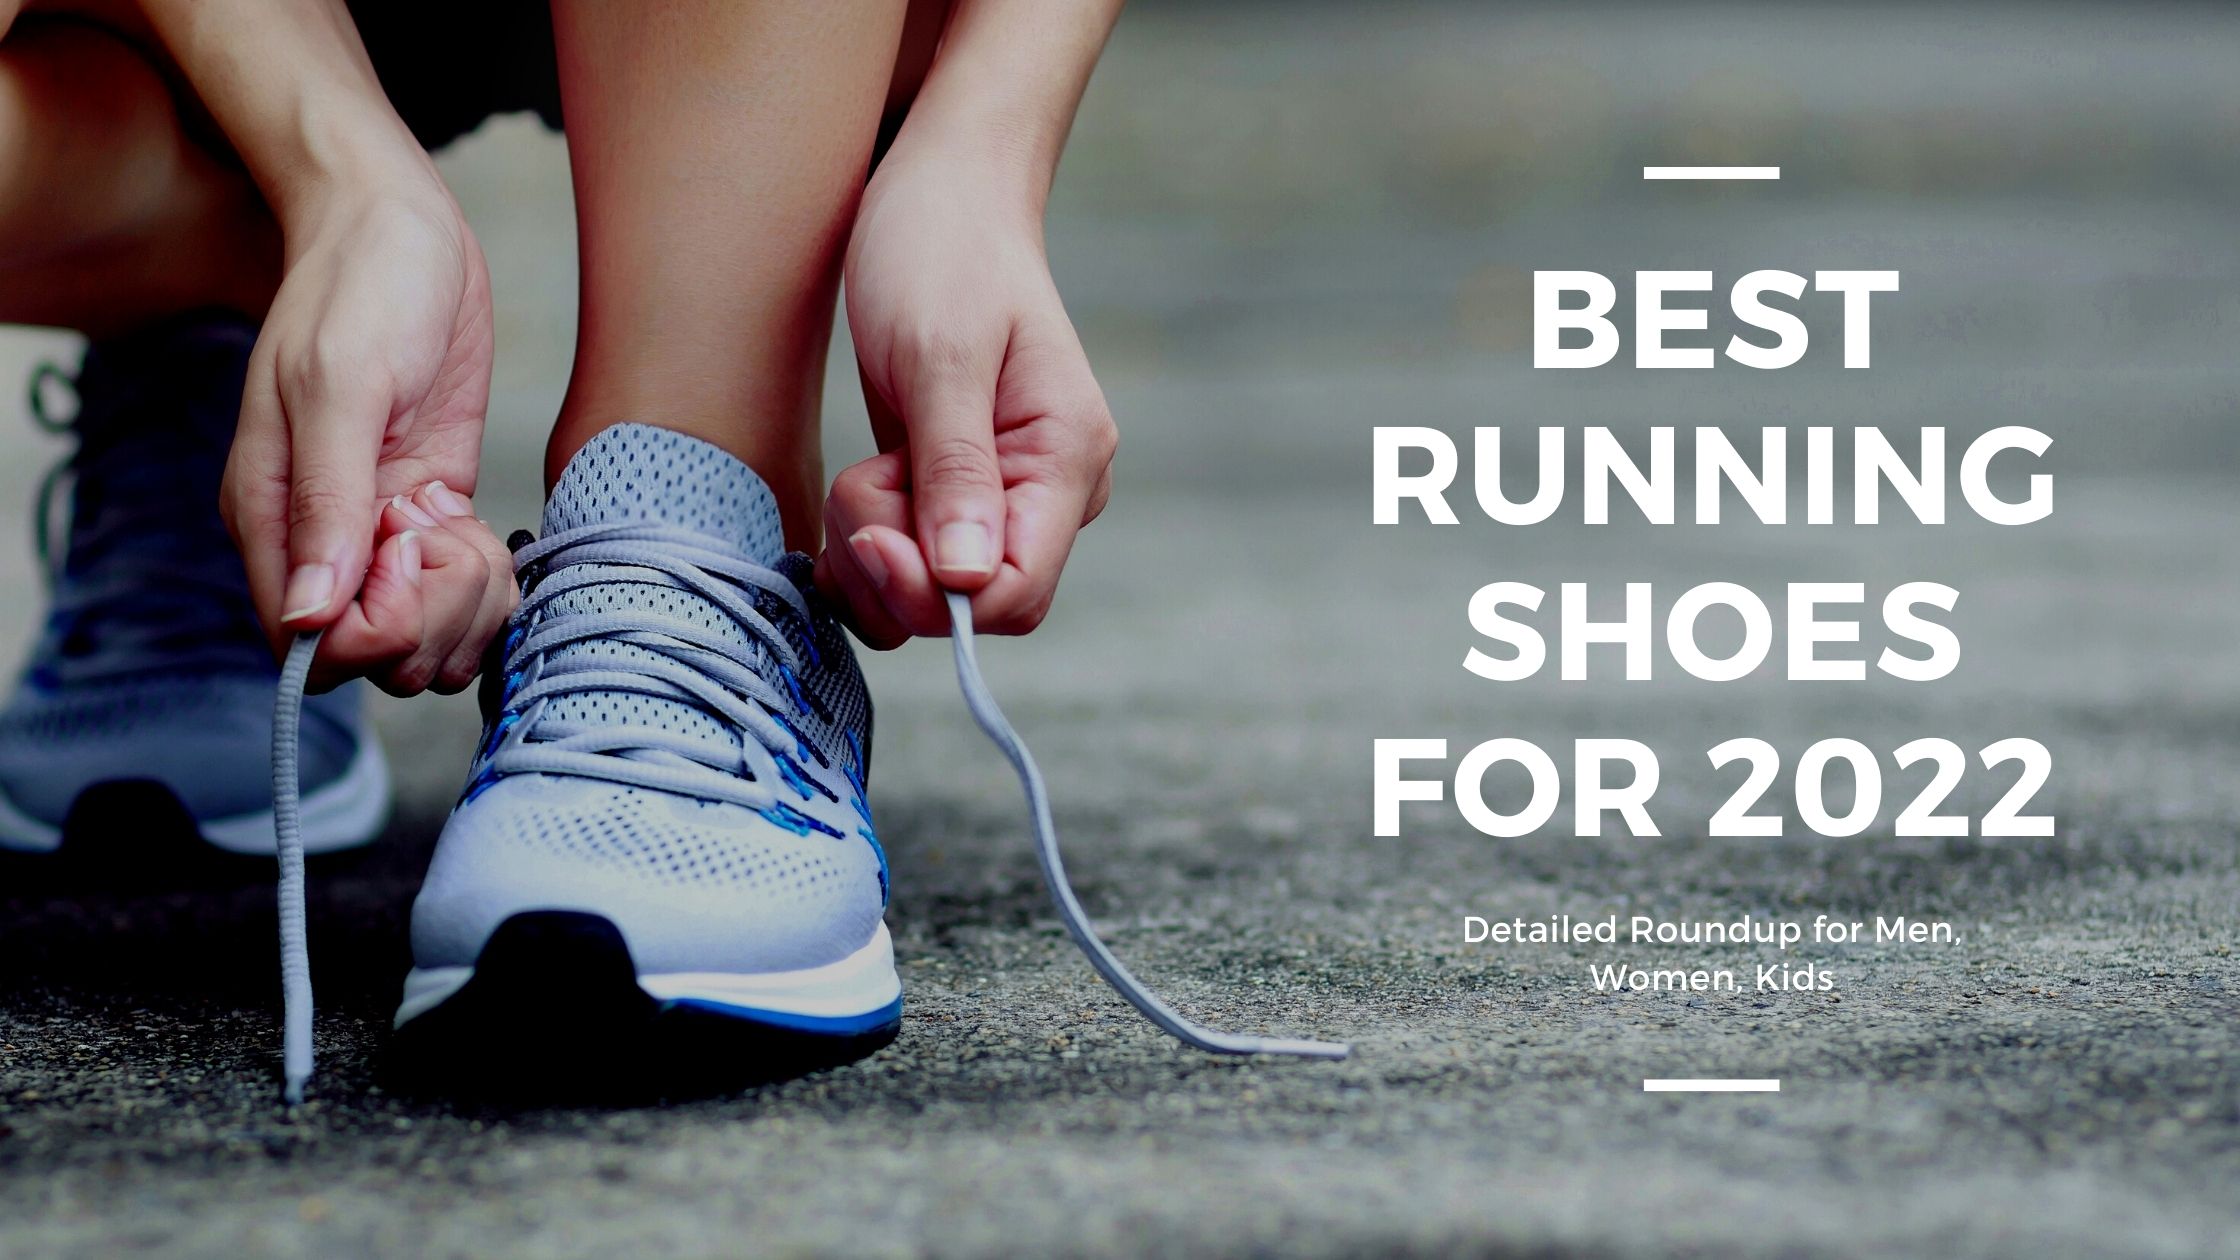 Best running shoes to buy in 2022